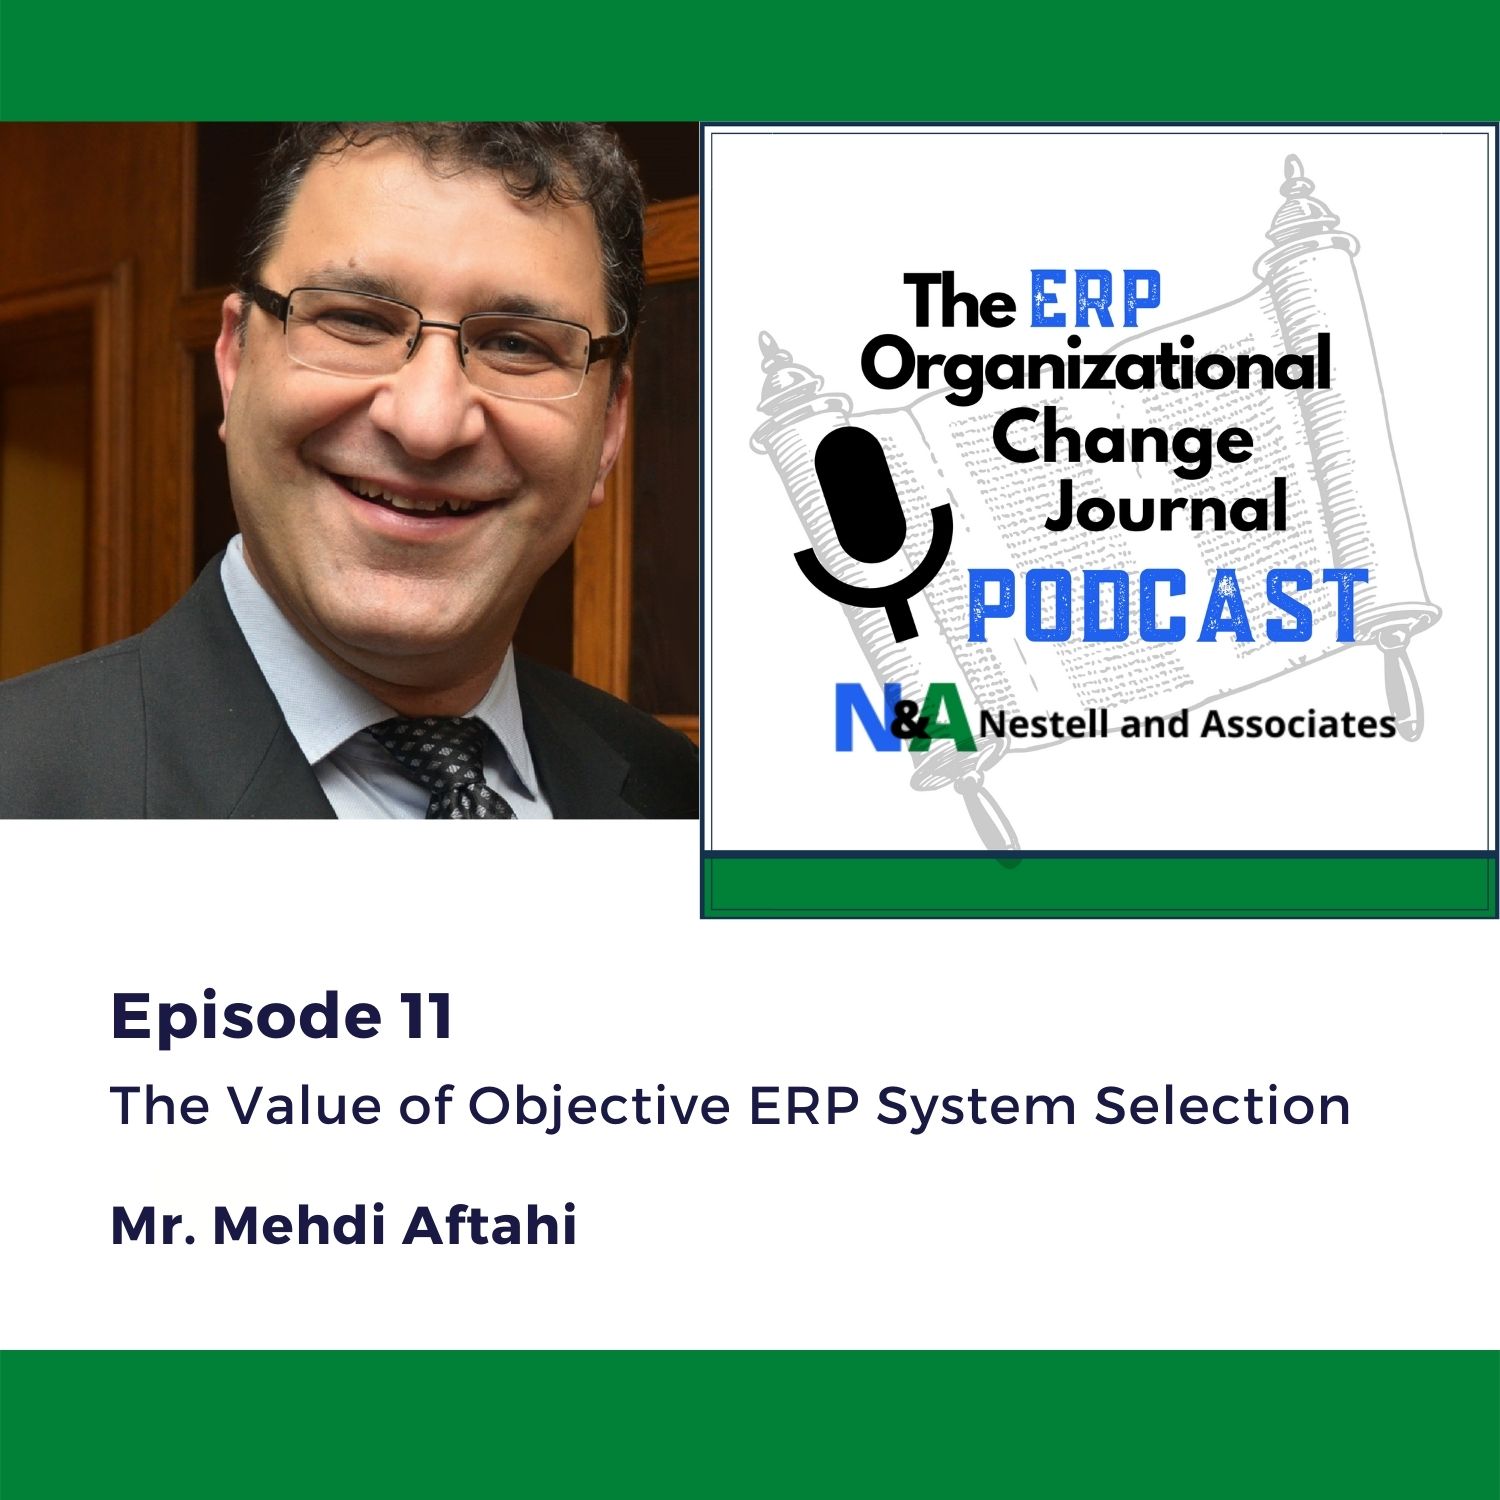 Episode 11 The Value of Objective ERP System Selection with Guest Mr. Mehdi Aftahi